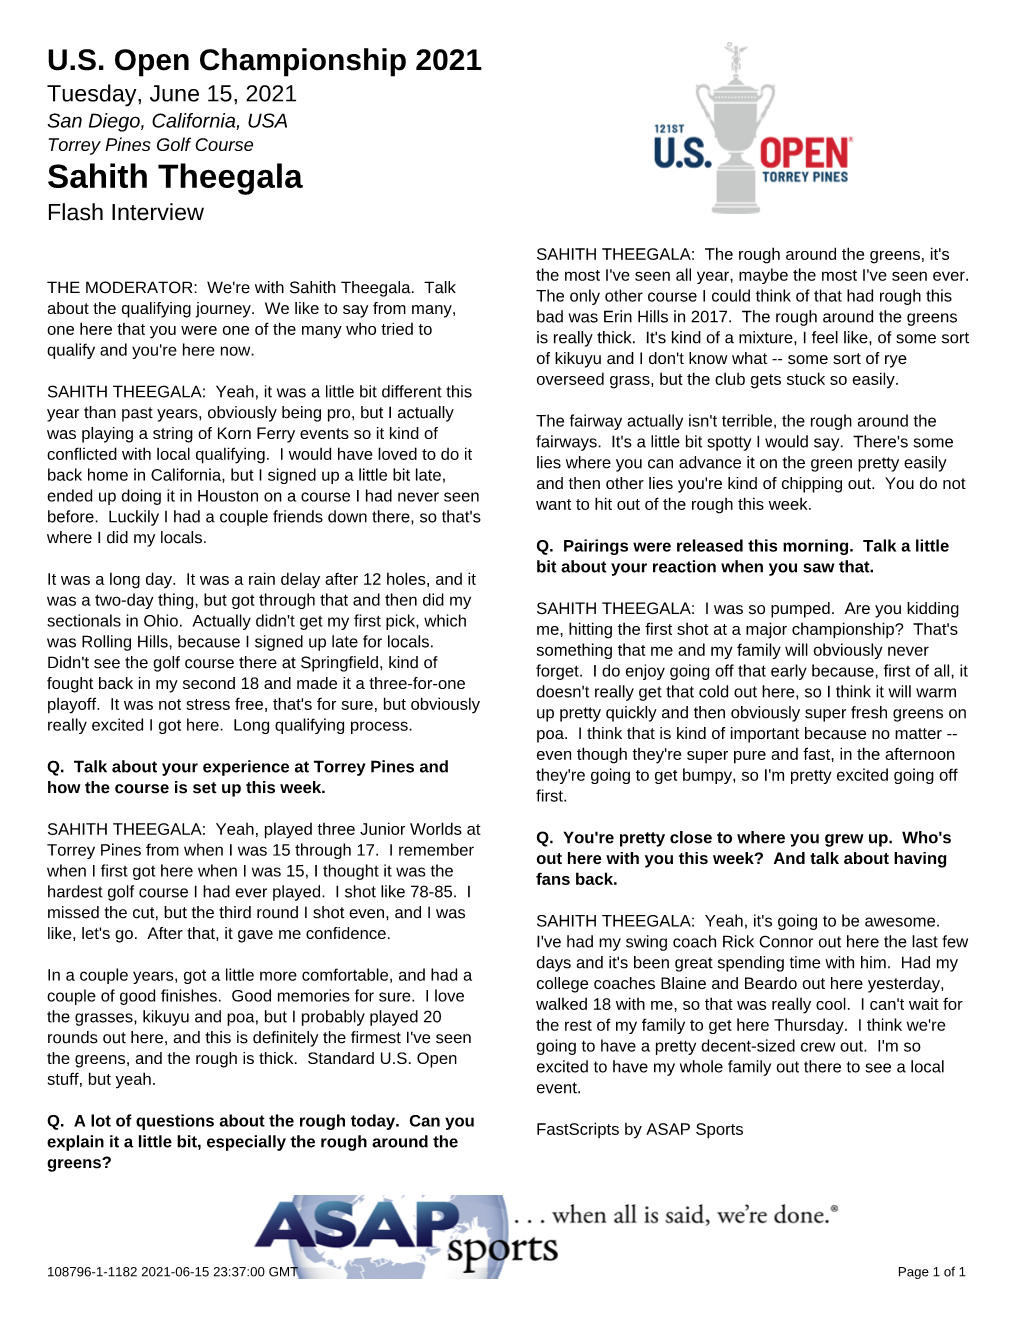 Sahith Theegala Flash Interview